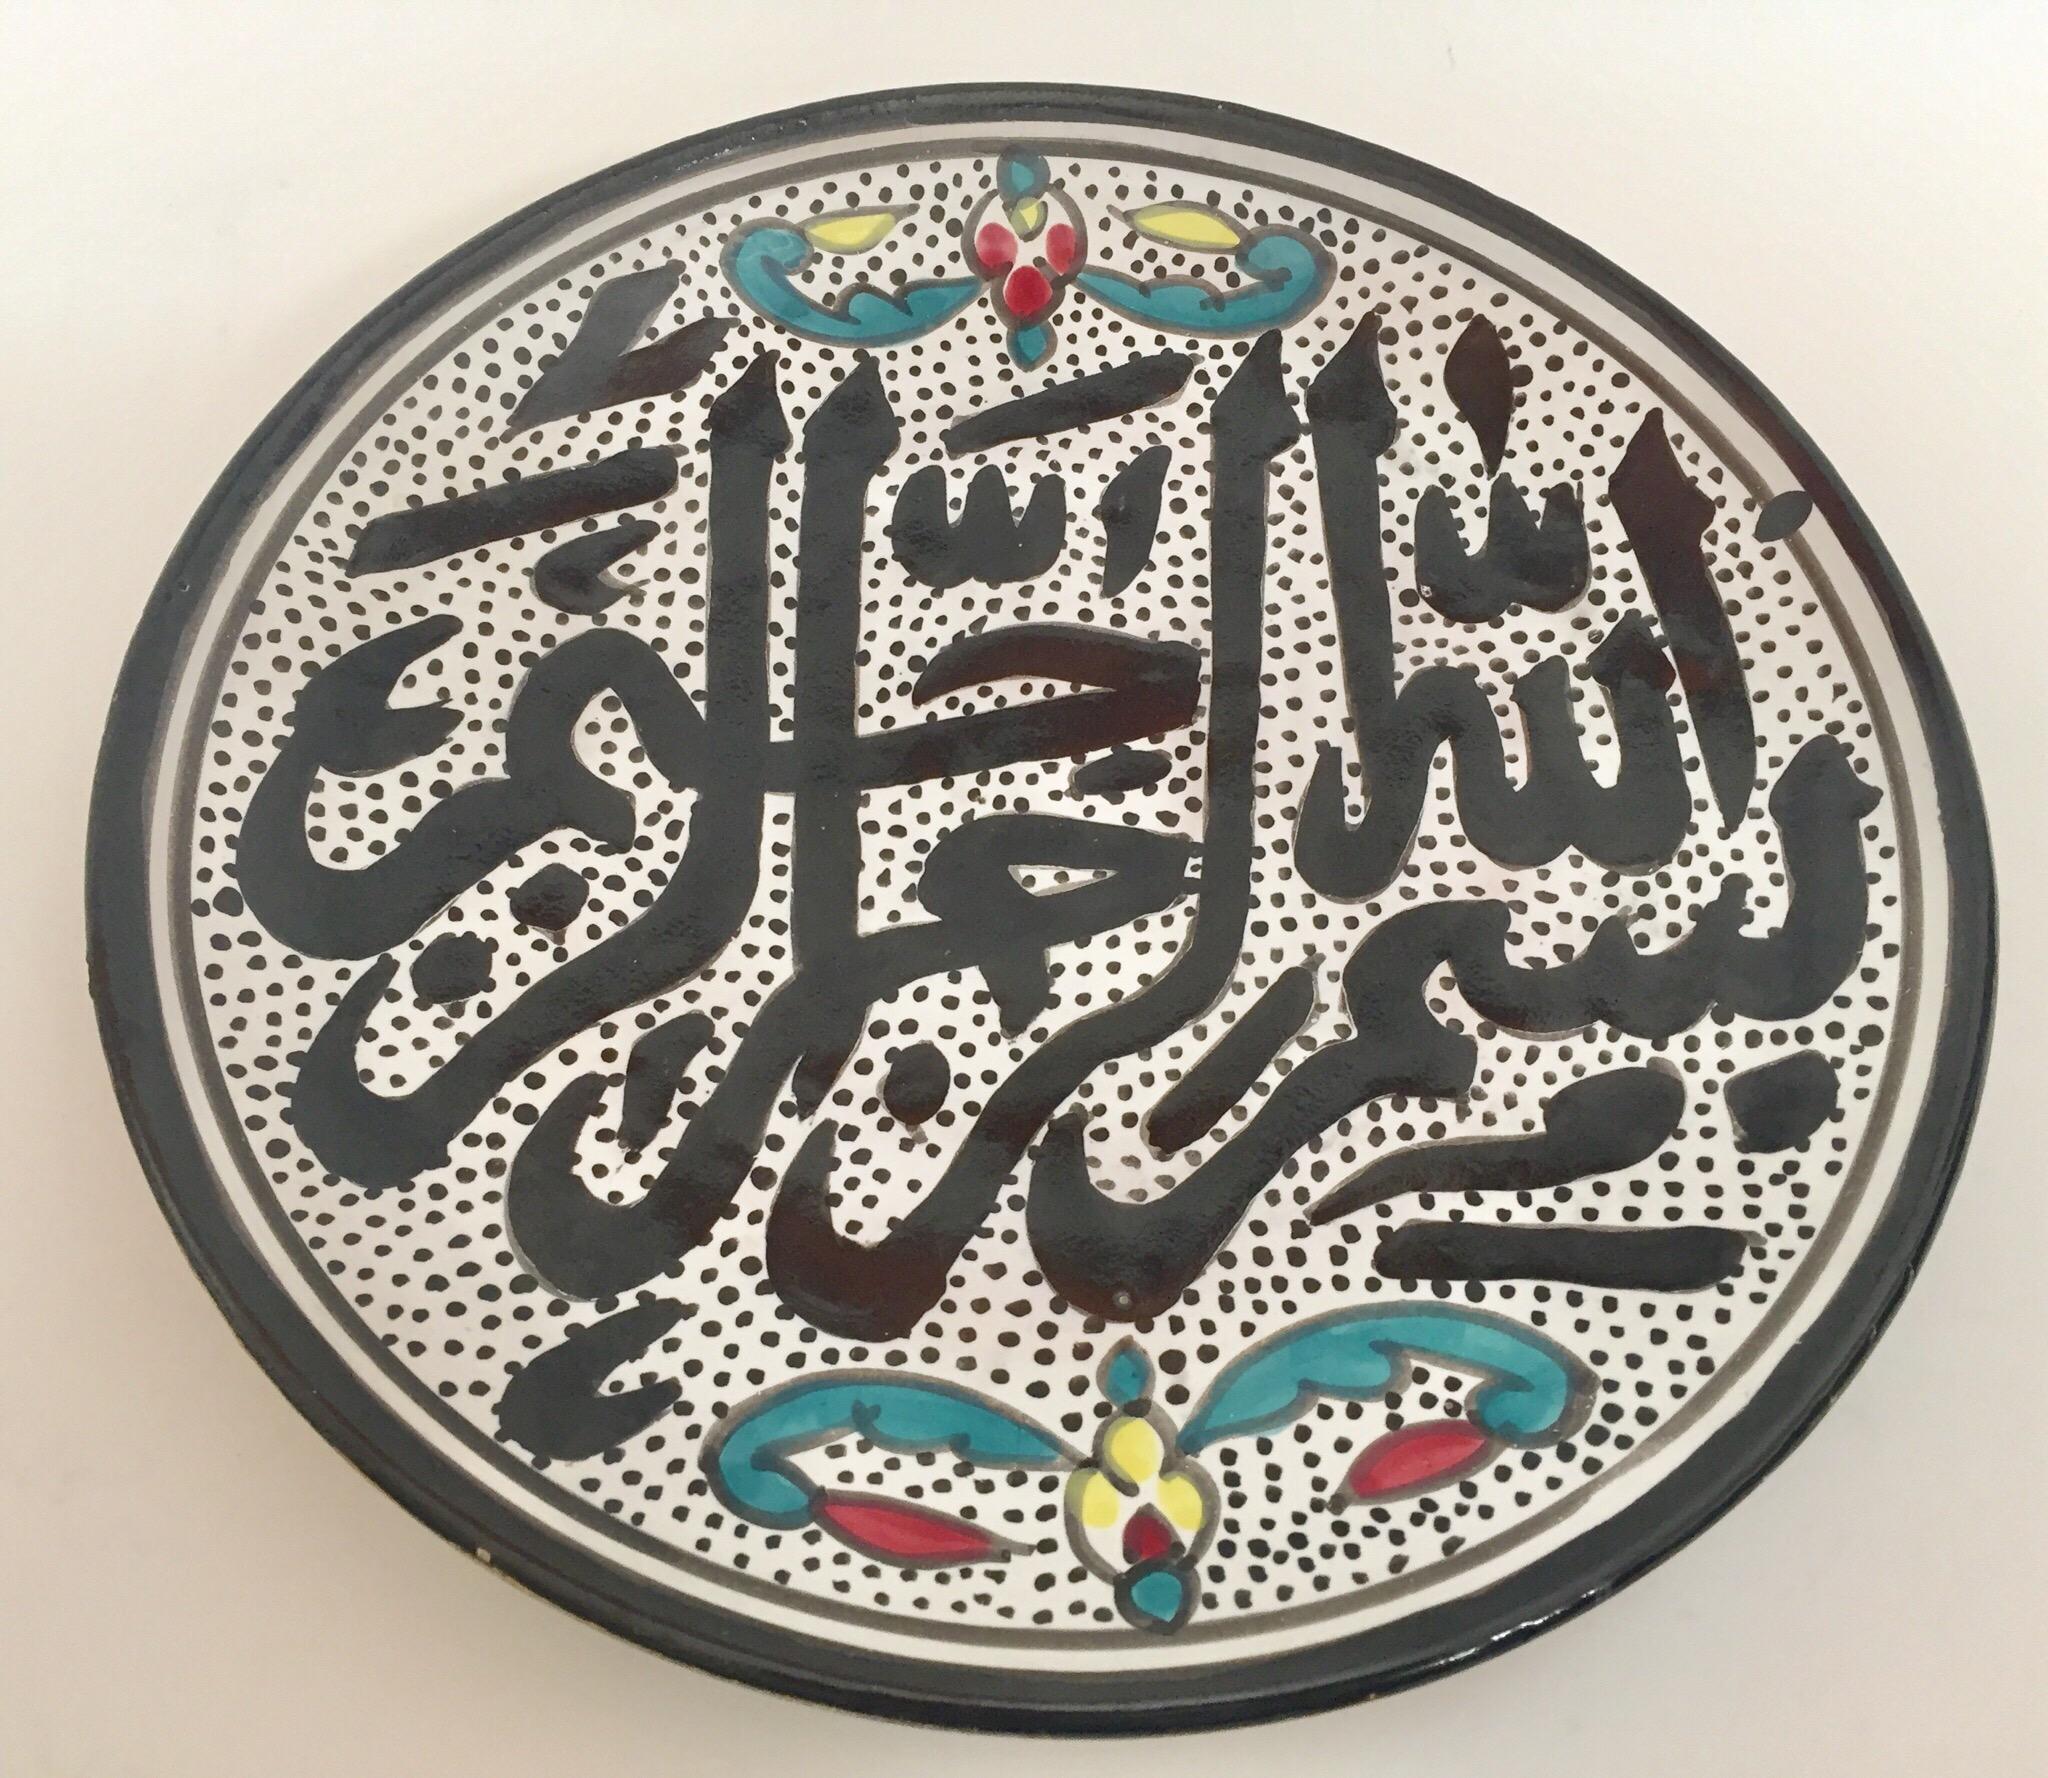 Polychrome hand painted and handcrafted Moorish ceramic wall decorative plate with polychrome Ottoman floral design and Islamic Koranic Calligraphy writing in the center.
